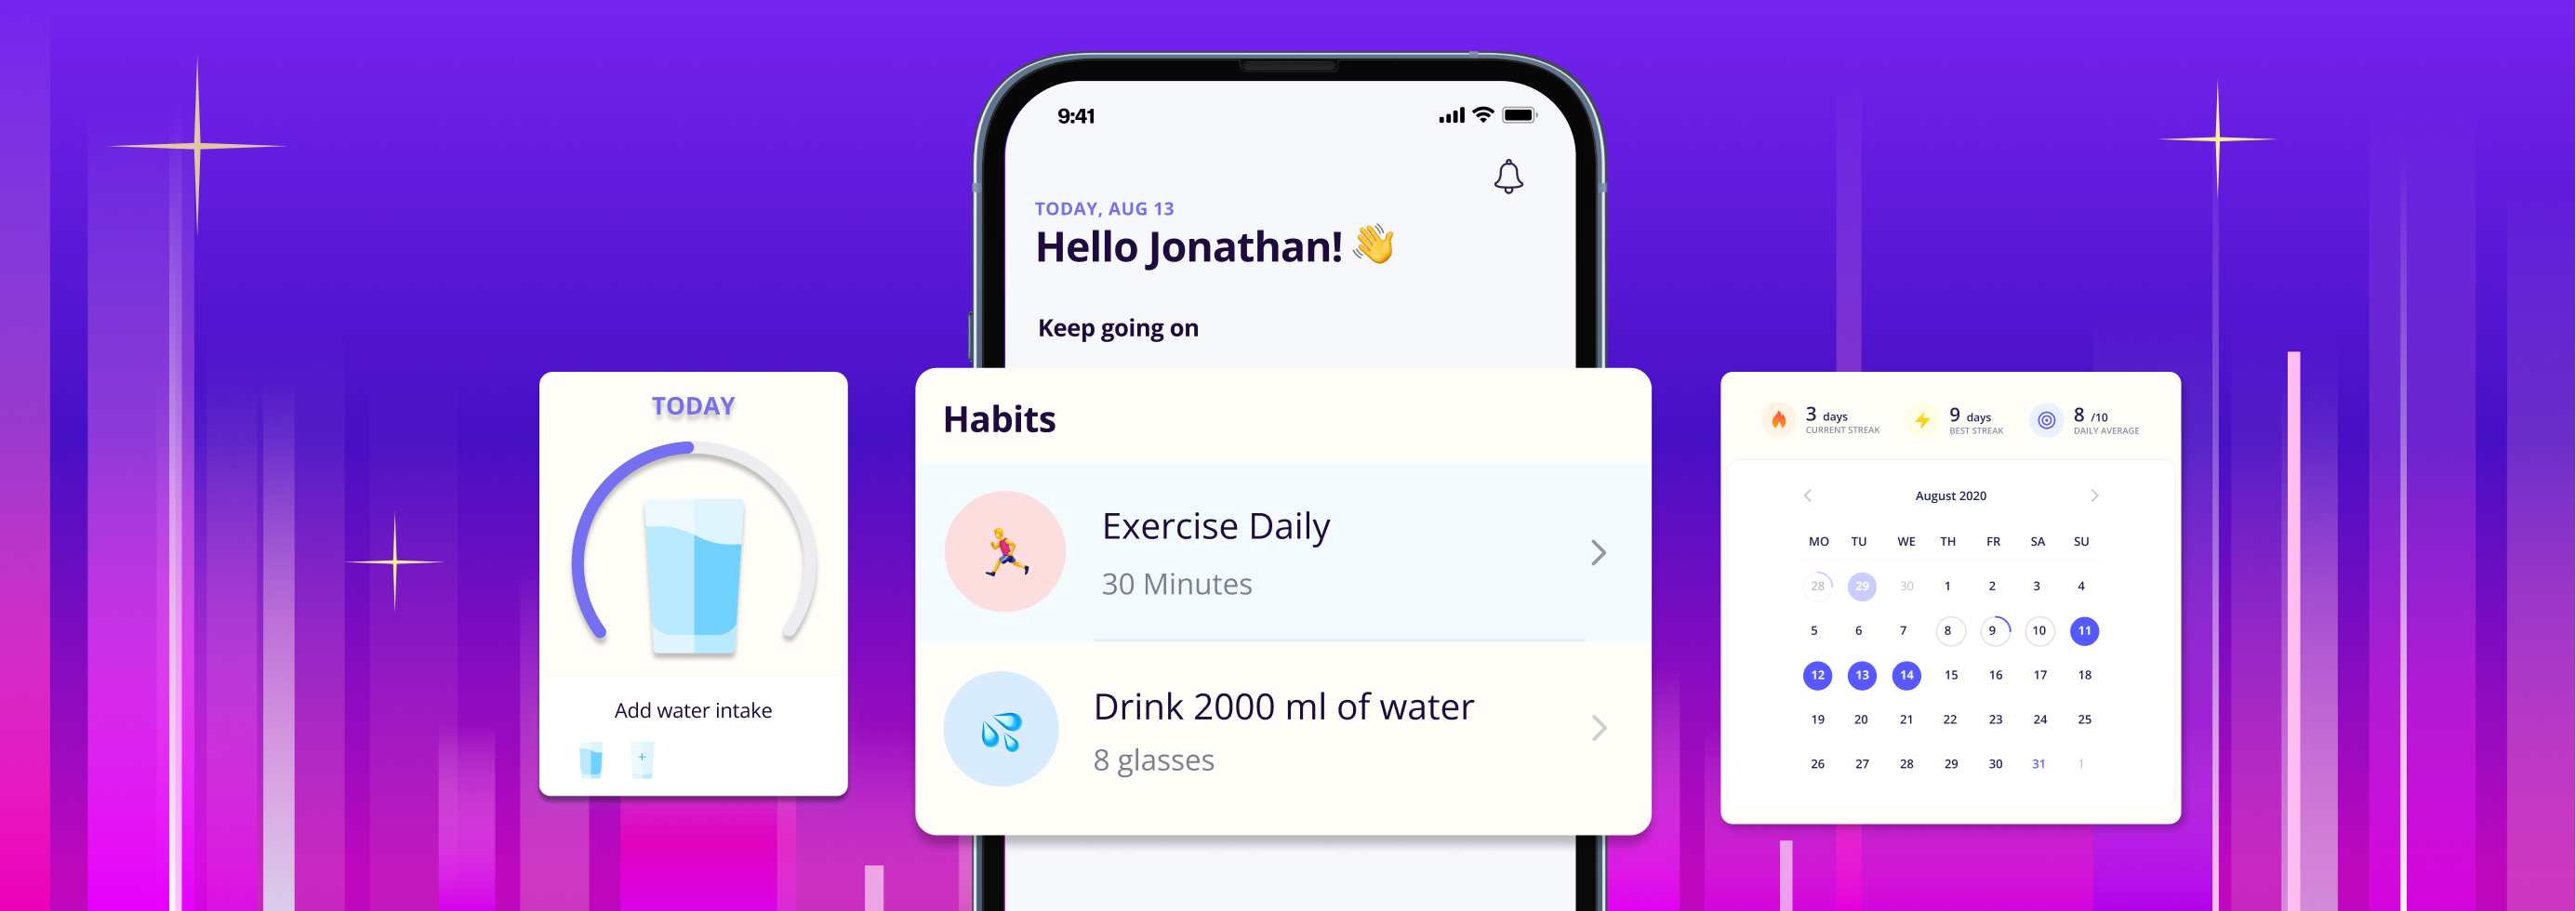 Introducing Habit Coaching and 2 new features